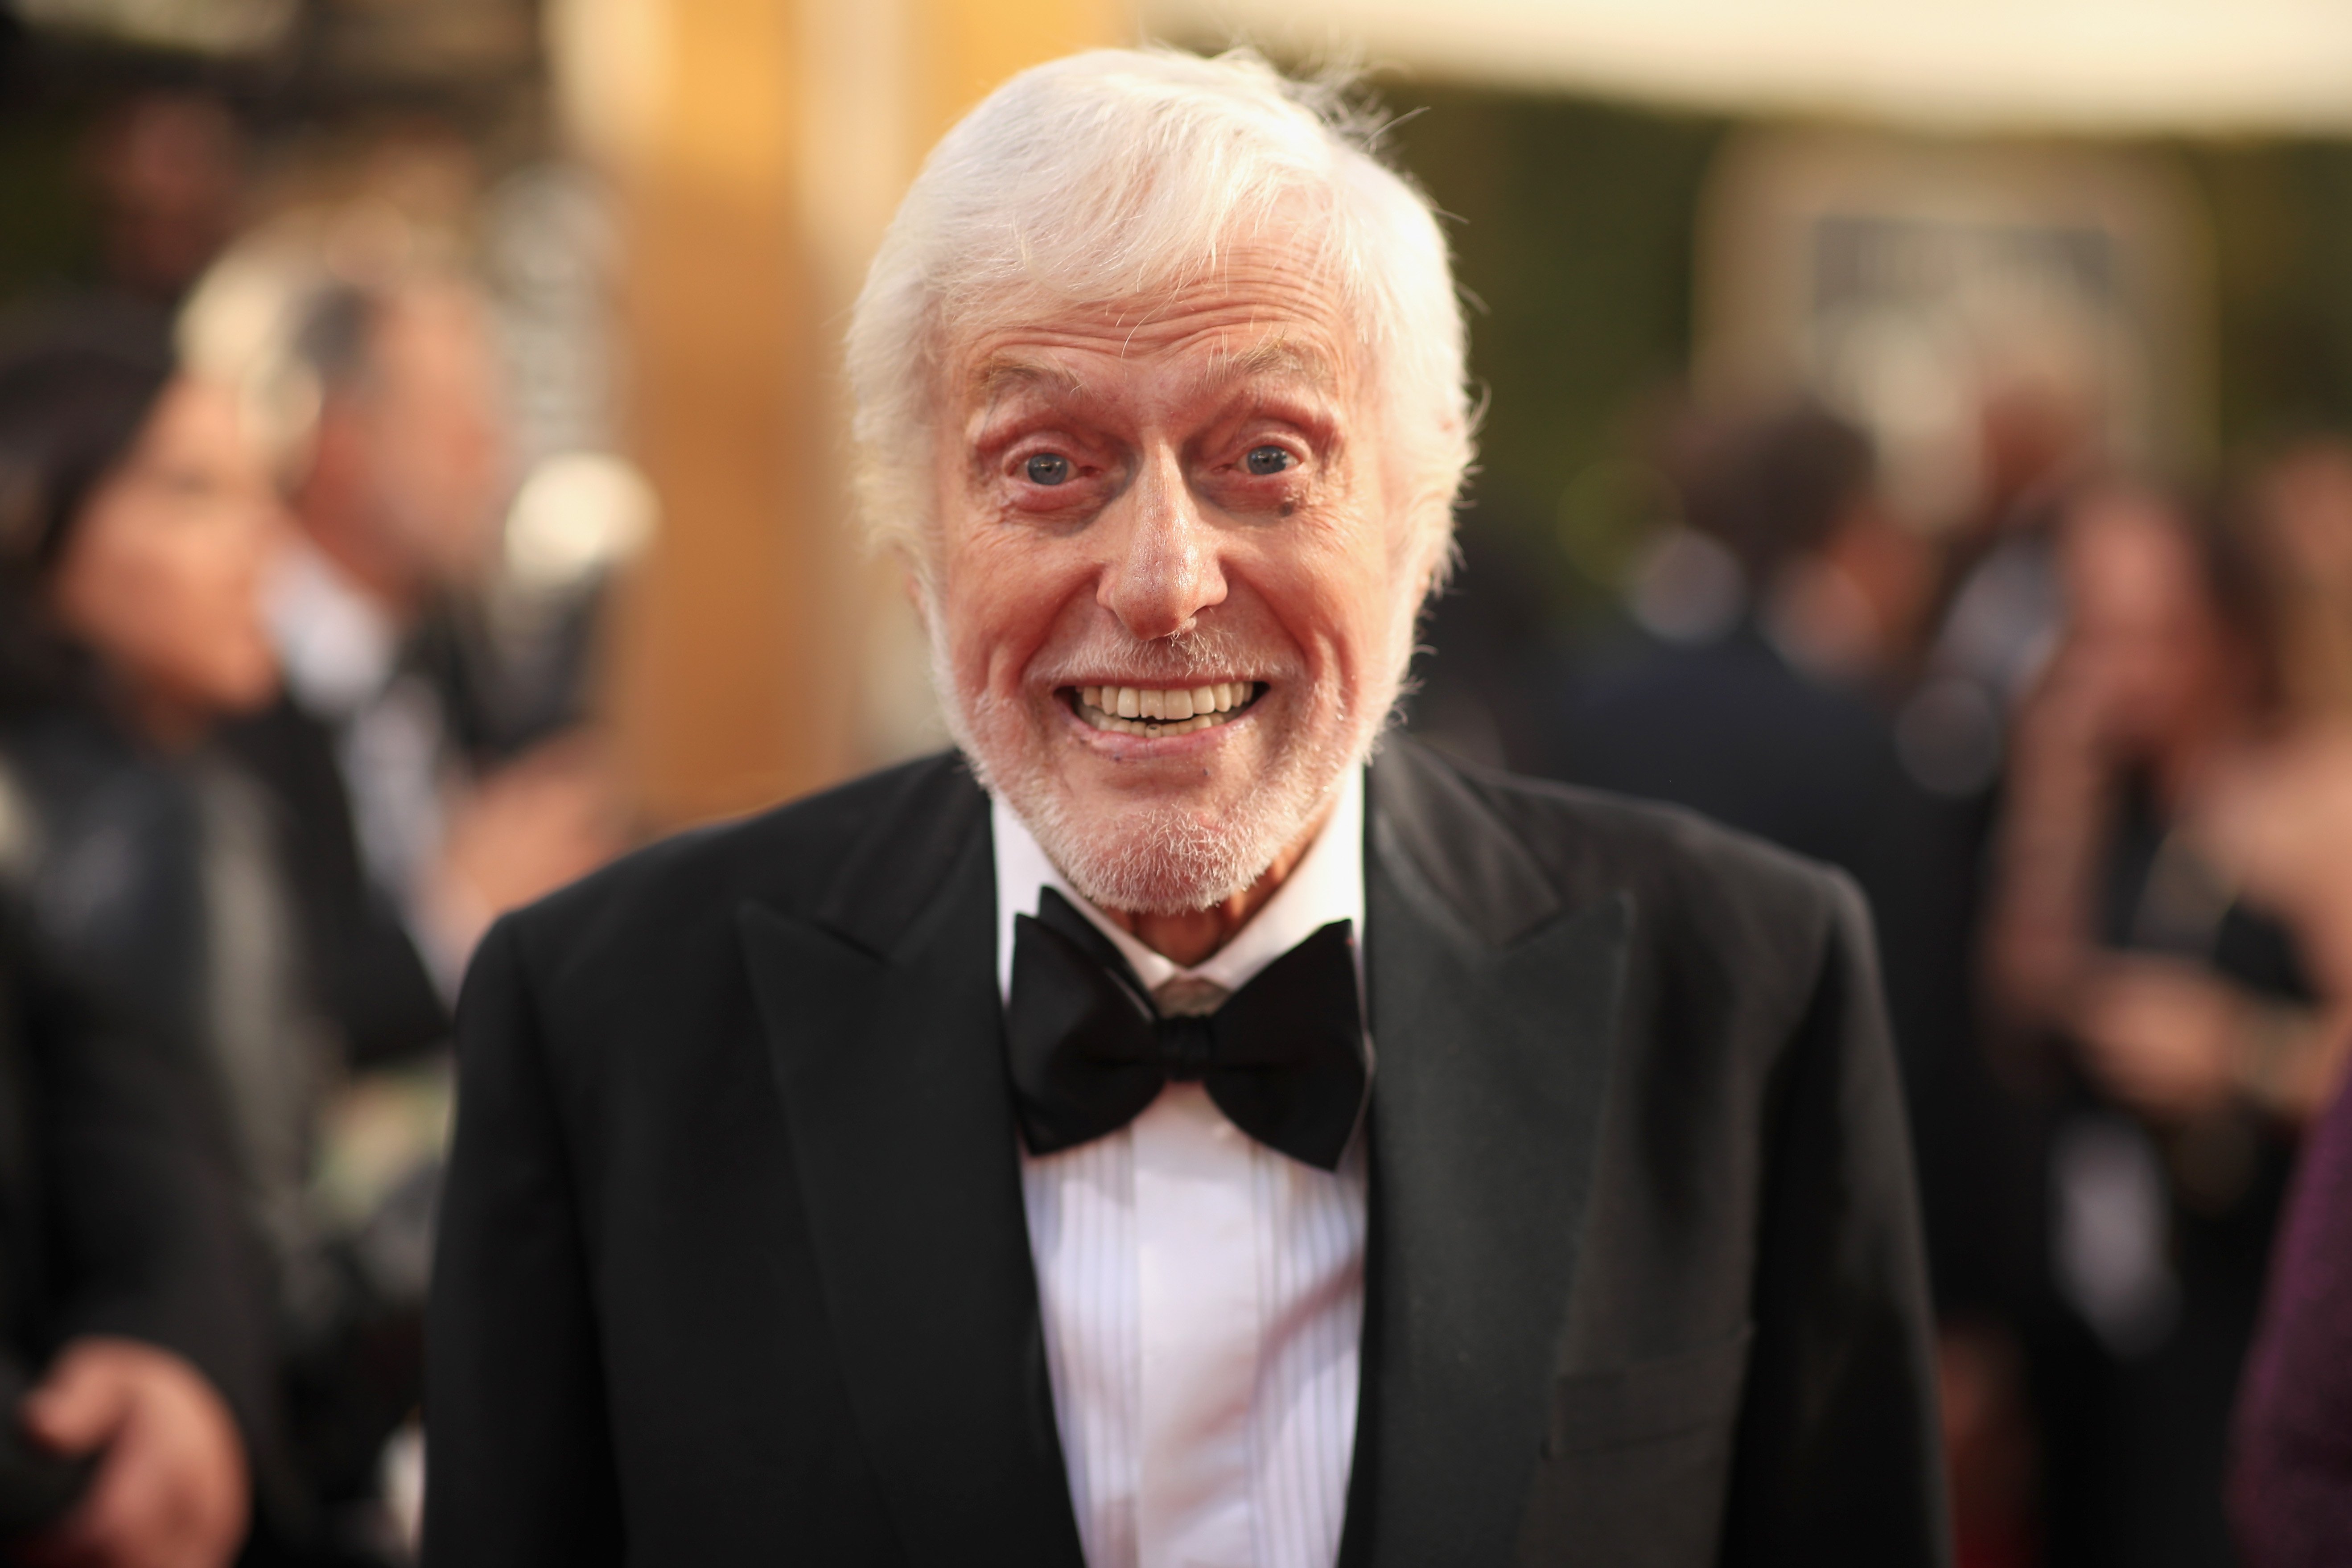 Dick Van Dyke arrives at the 76th Annual Golden Globe Awards held at the Beverly Hilton Hotel on January 6, 2019. | Source: Getty Images